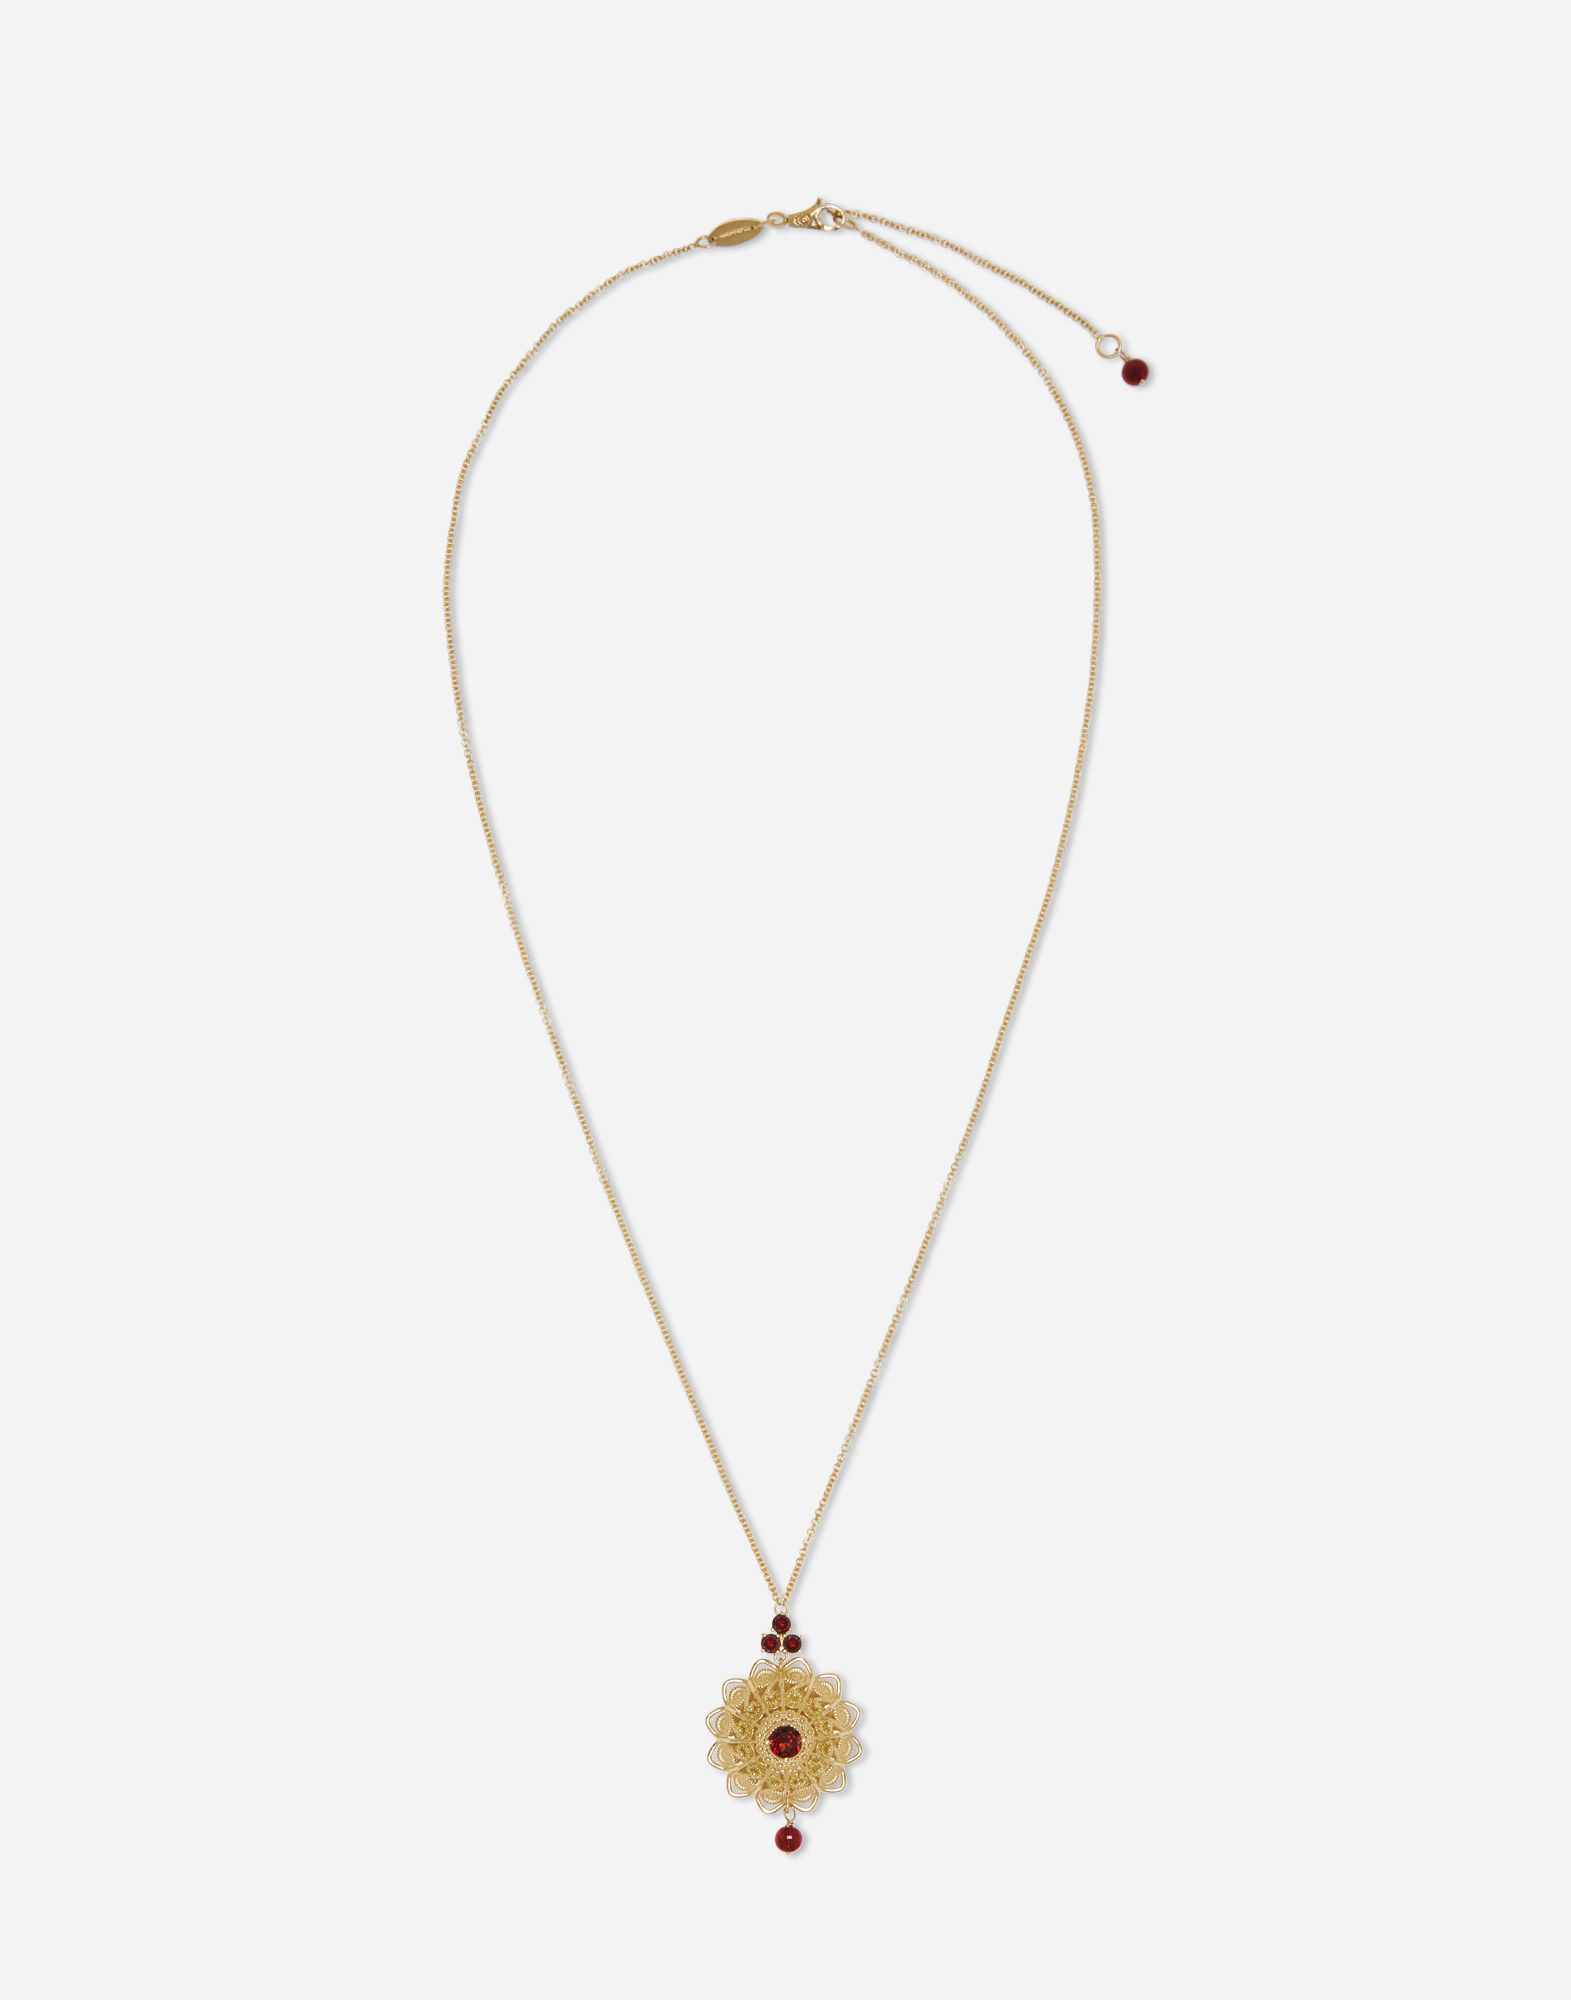 Dolce & Gabbana Pizzo Pendant In Yellow Gold And Rhodolite Garnets Gold Female Onesize